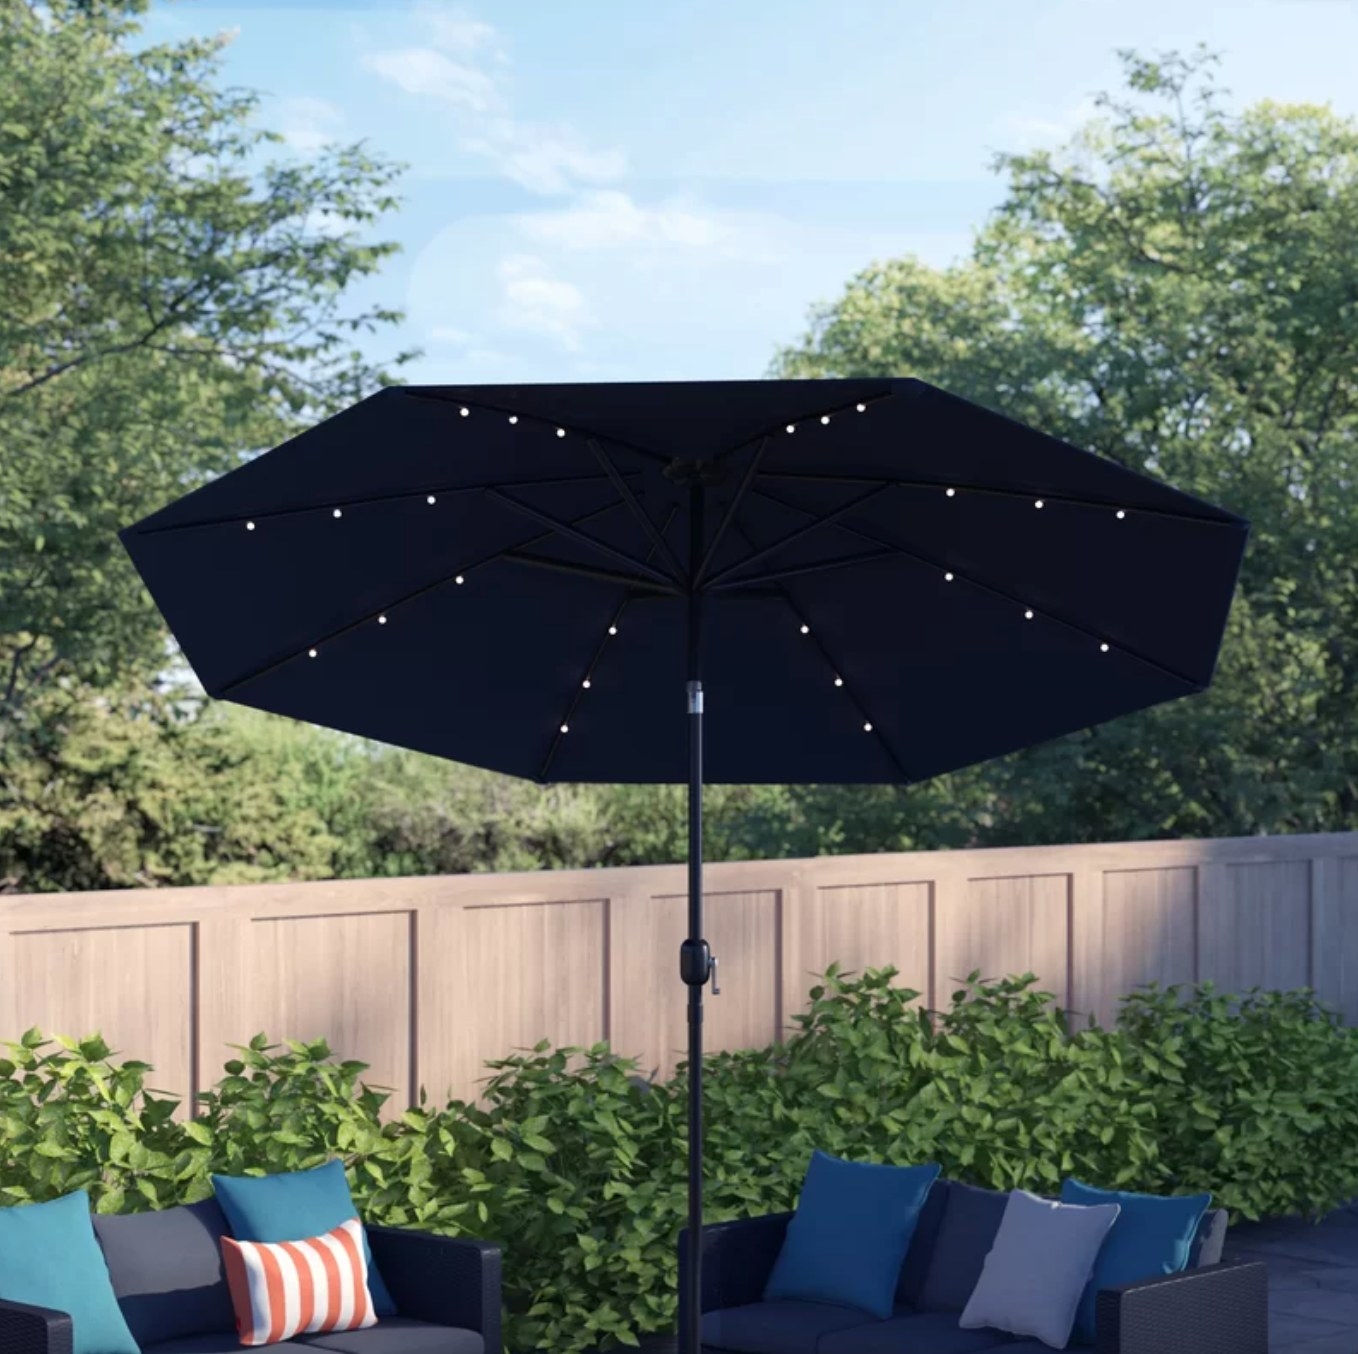 the black umbrella with LEDs on the underside in a decorated outdoor space